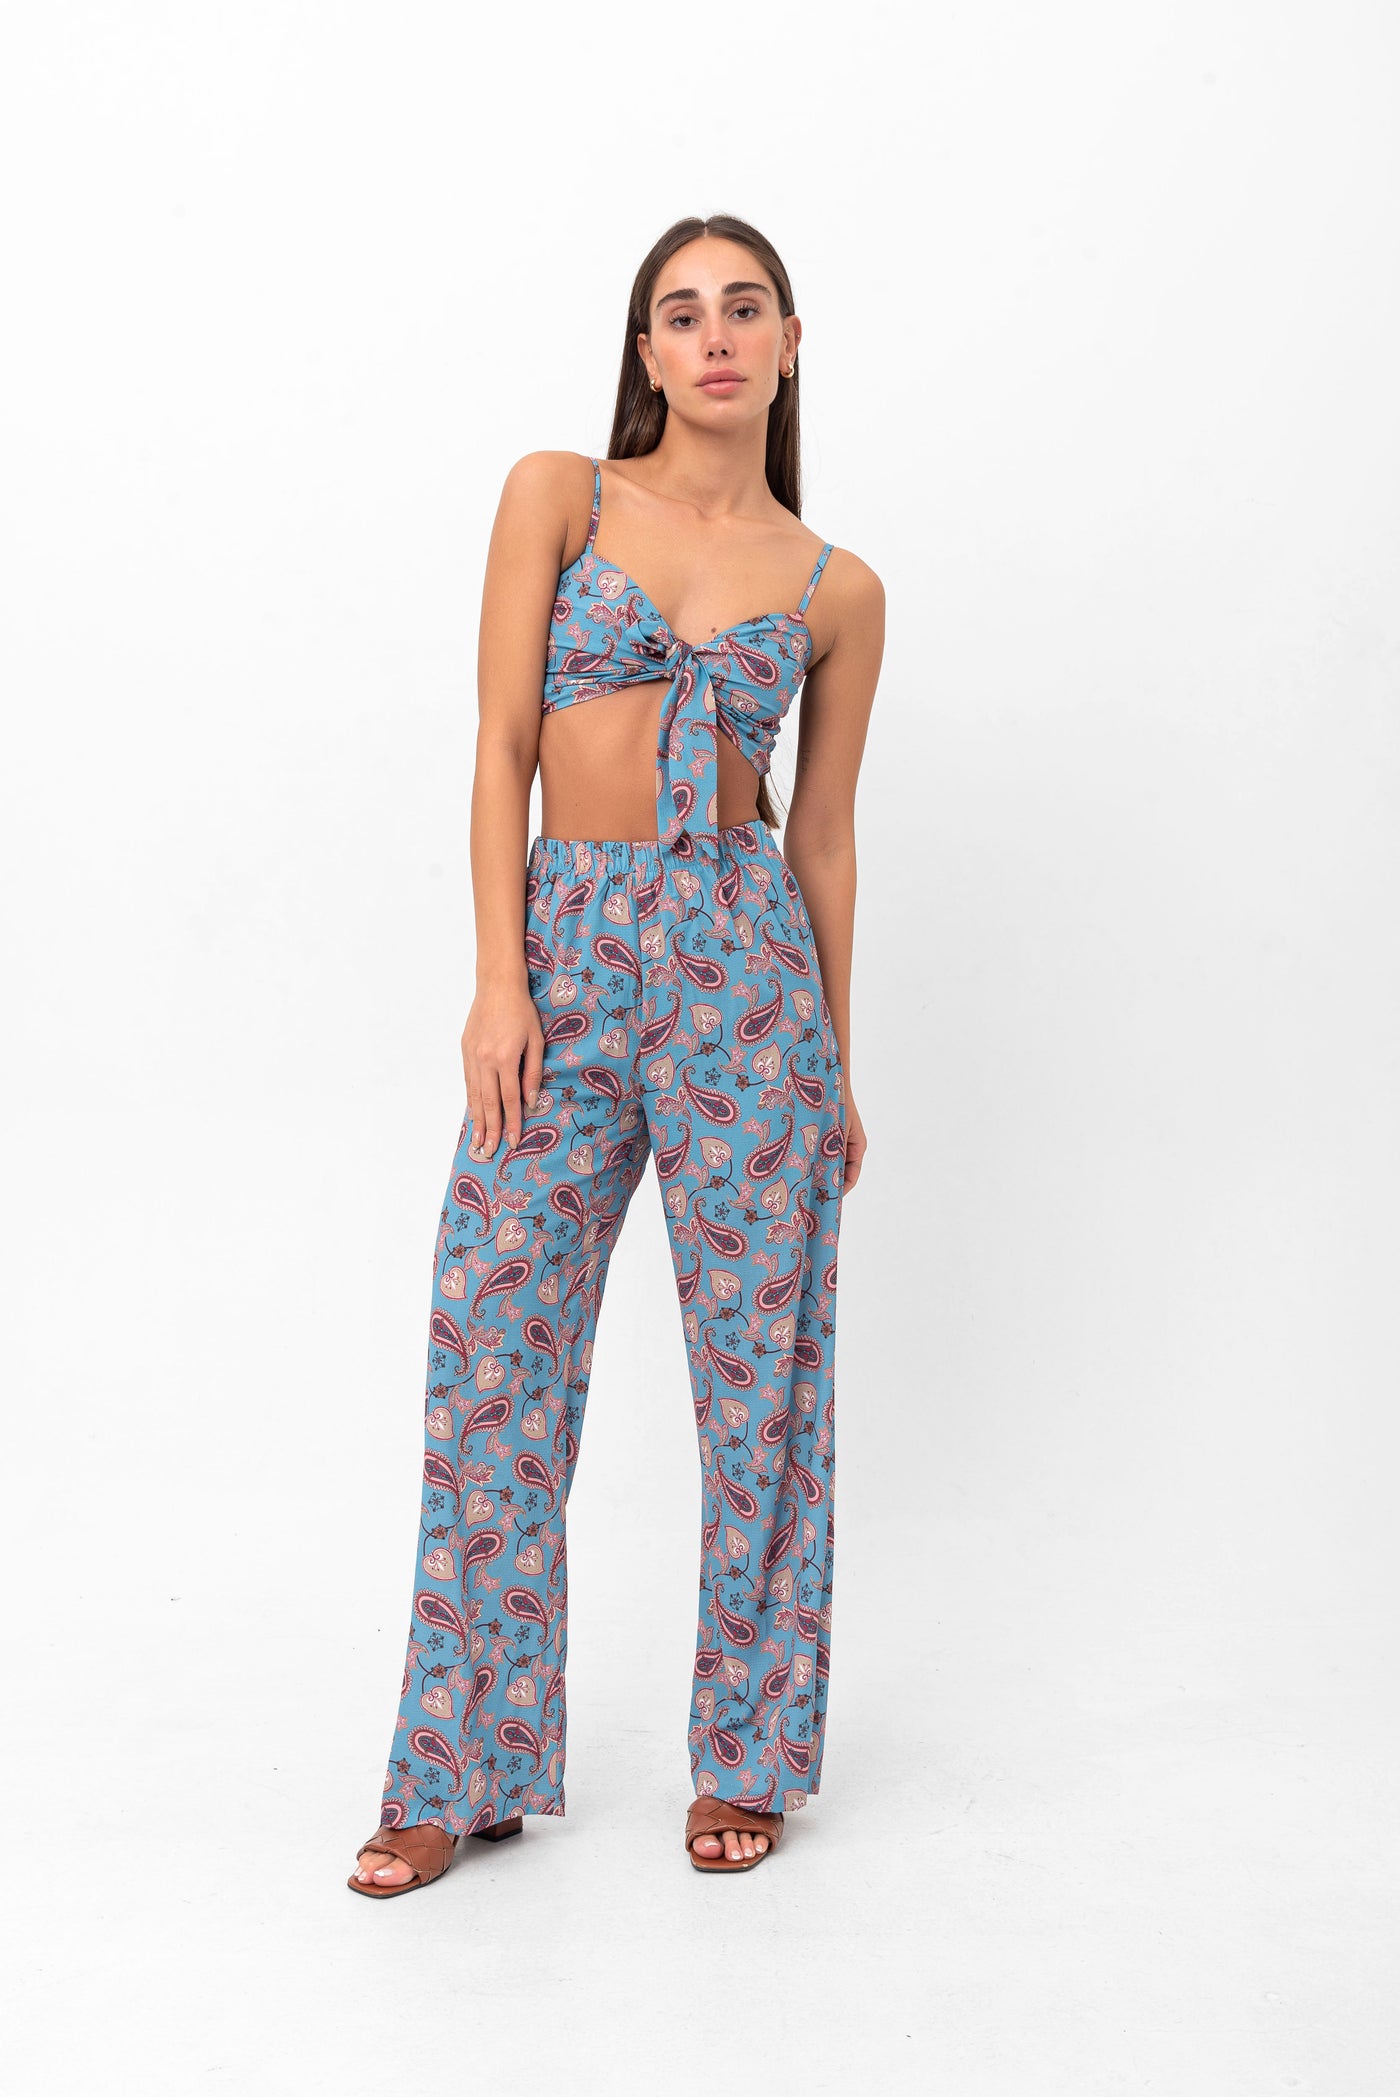 Sunset Soiree Two-Piece Top Set